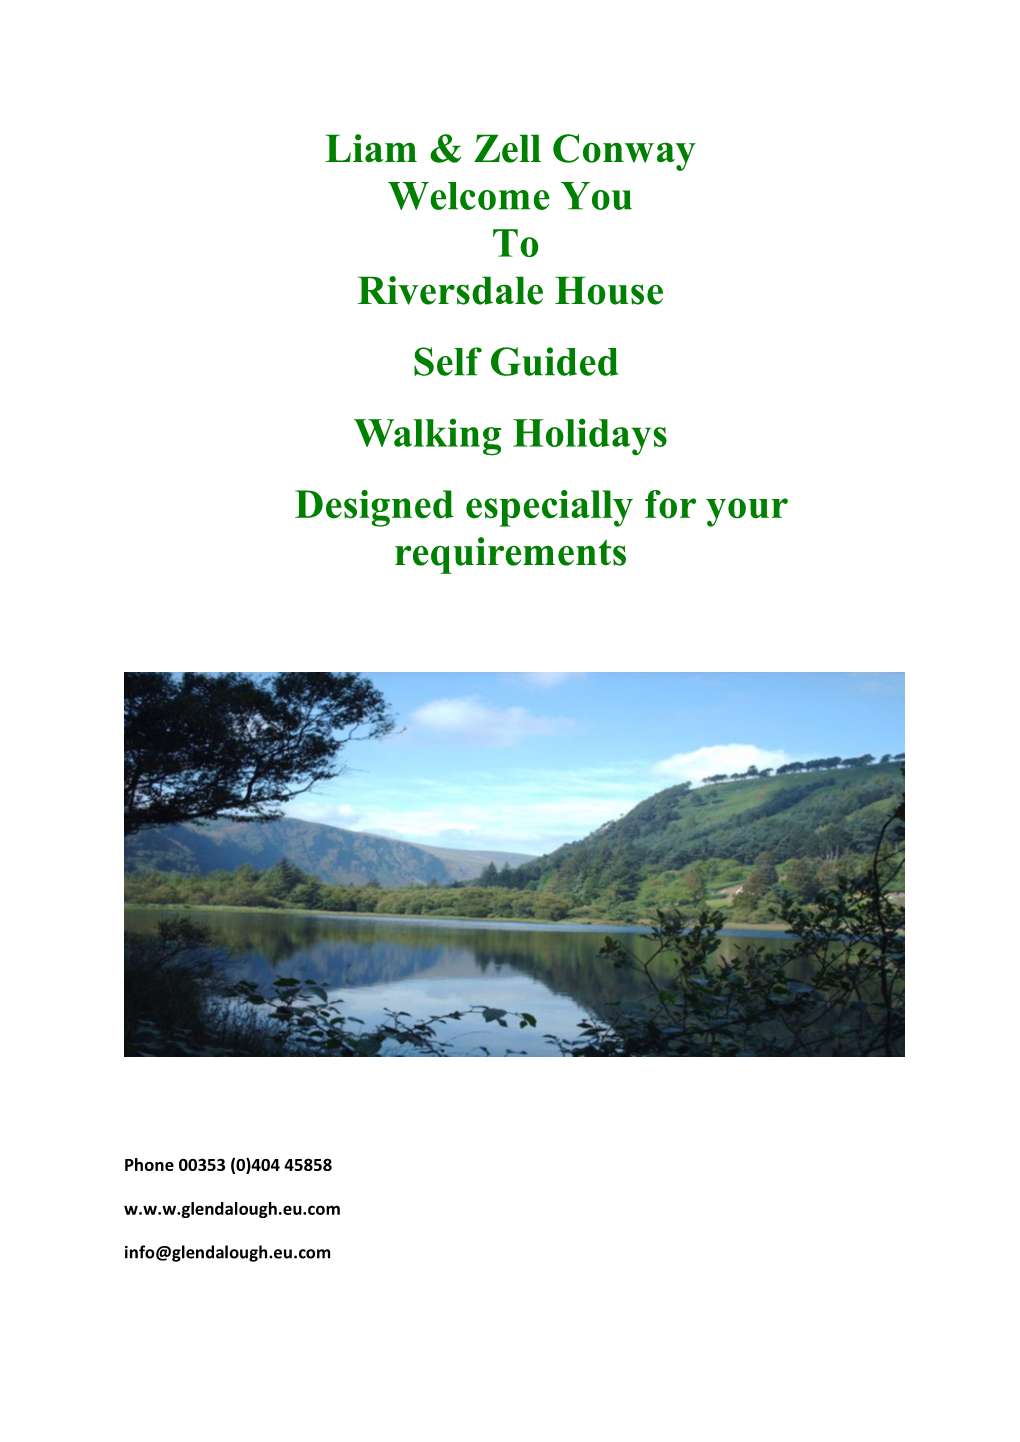 Liam & Zell Conway Welcome You to Riversdale House Self Guided